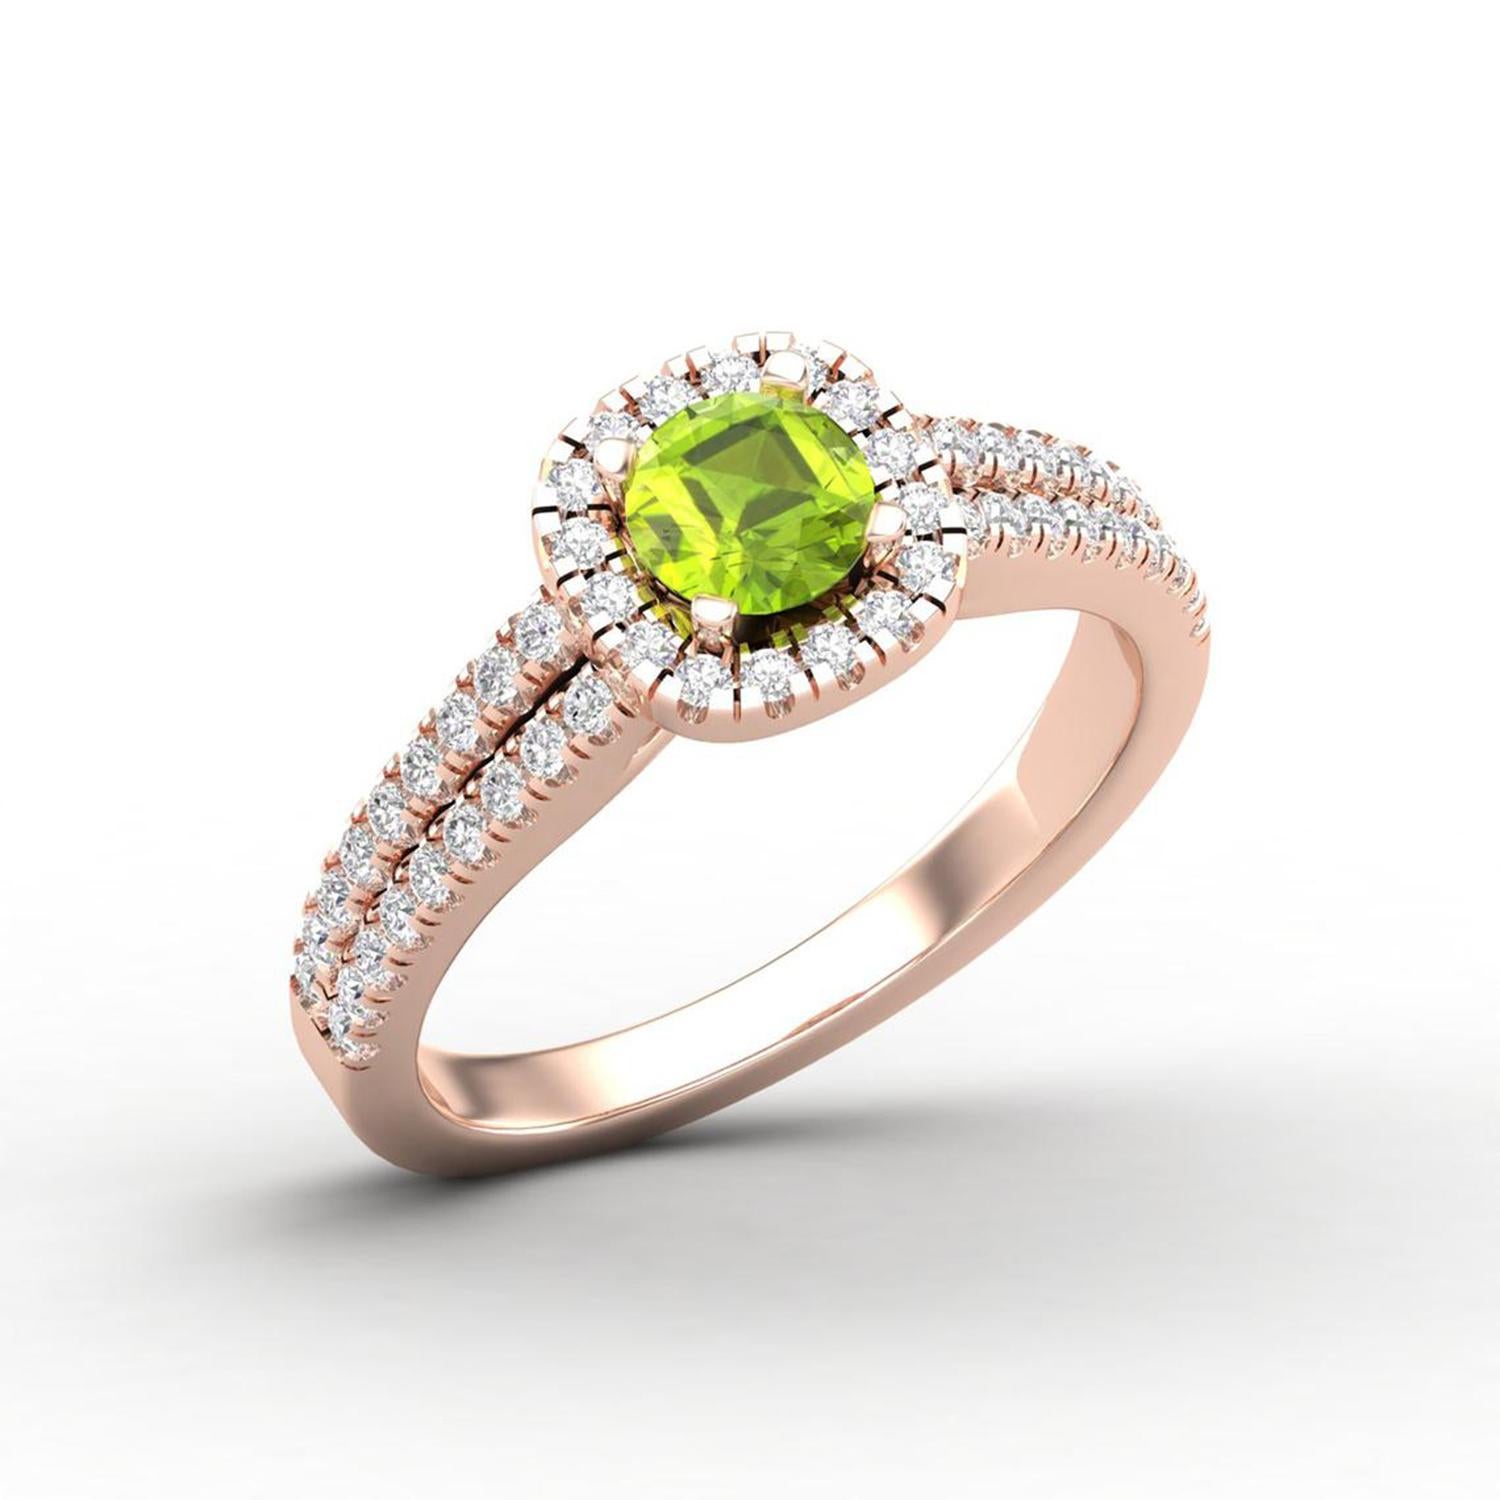 Women's 14 Karat Gold 5 MM Green Peridot Ring / Round Diamond Ring / Solitaire Ring For Sale